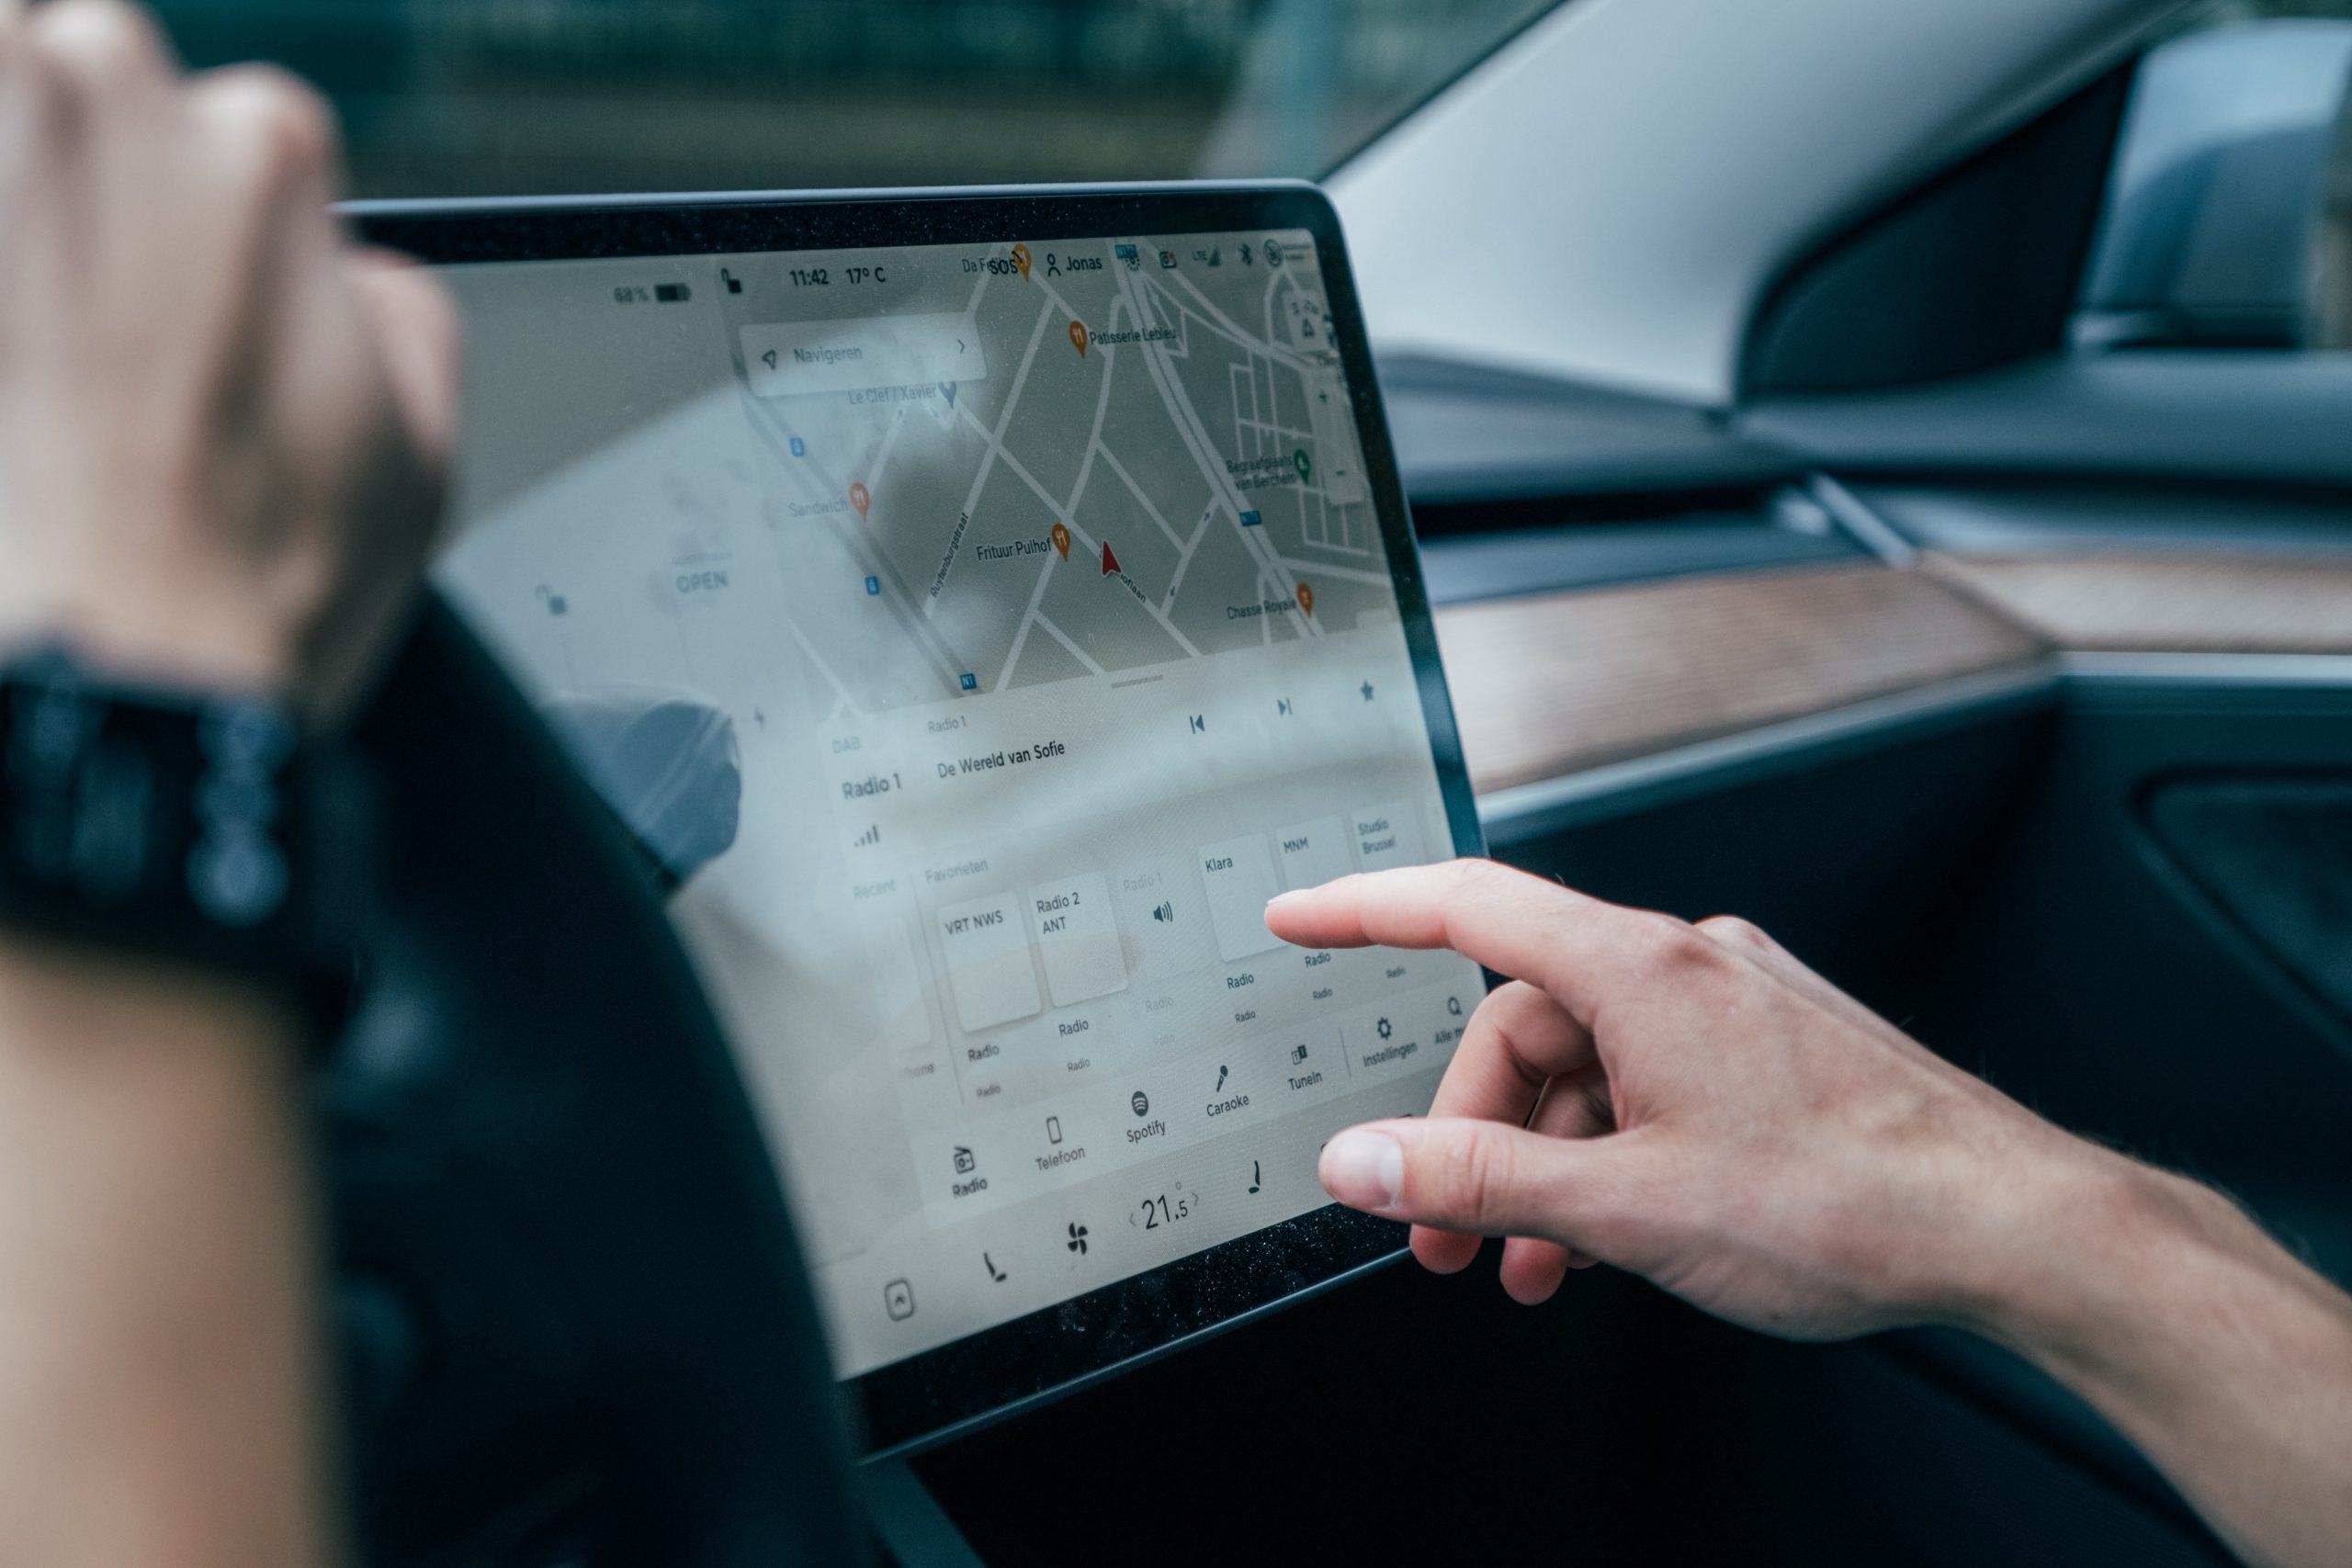 Tesla Touchscreen, Where You Can Connect to Wi-Fi